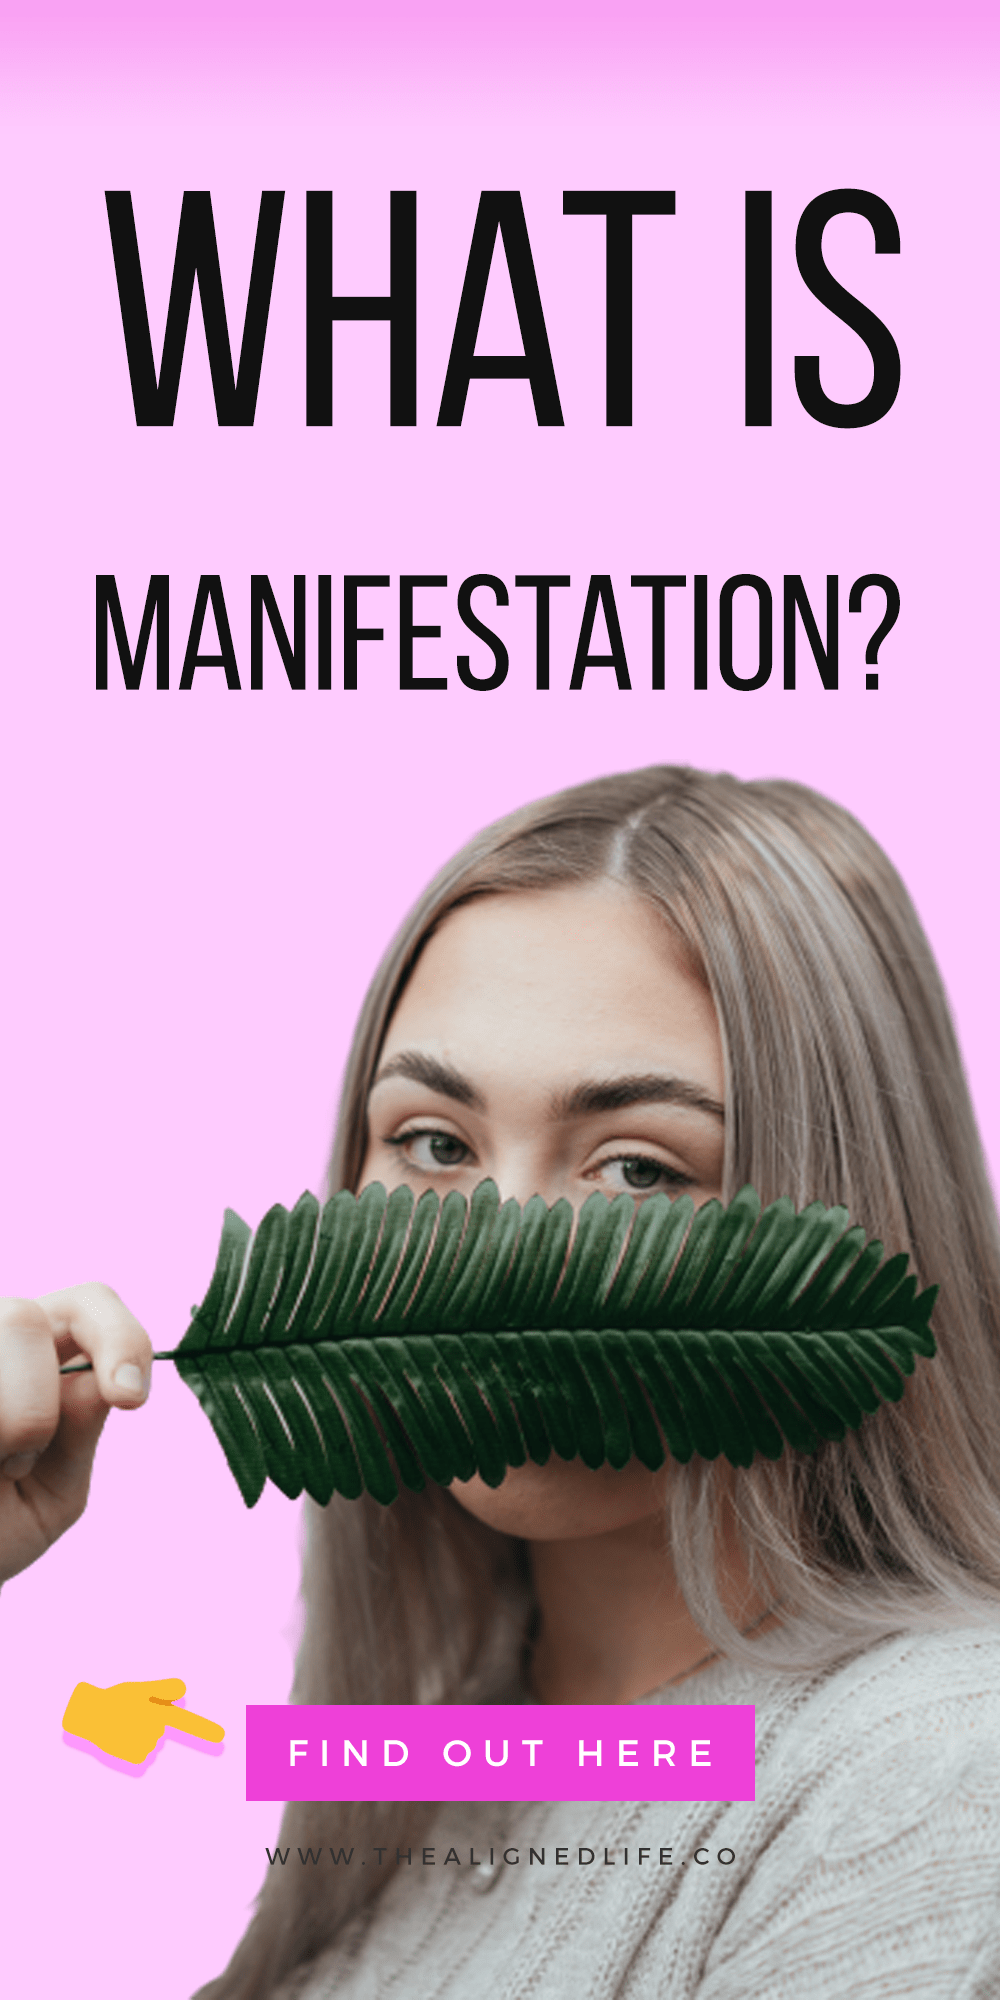 What Is Manifestation? Manifesting Defined!